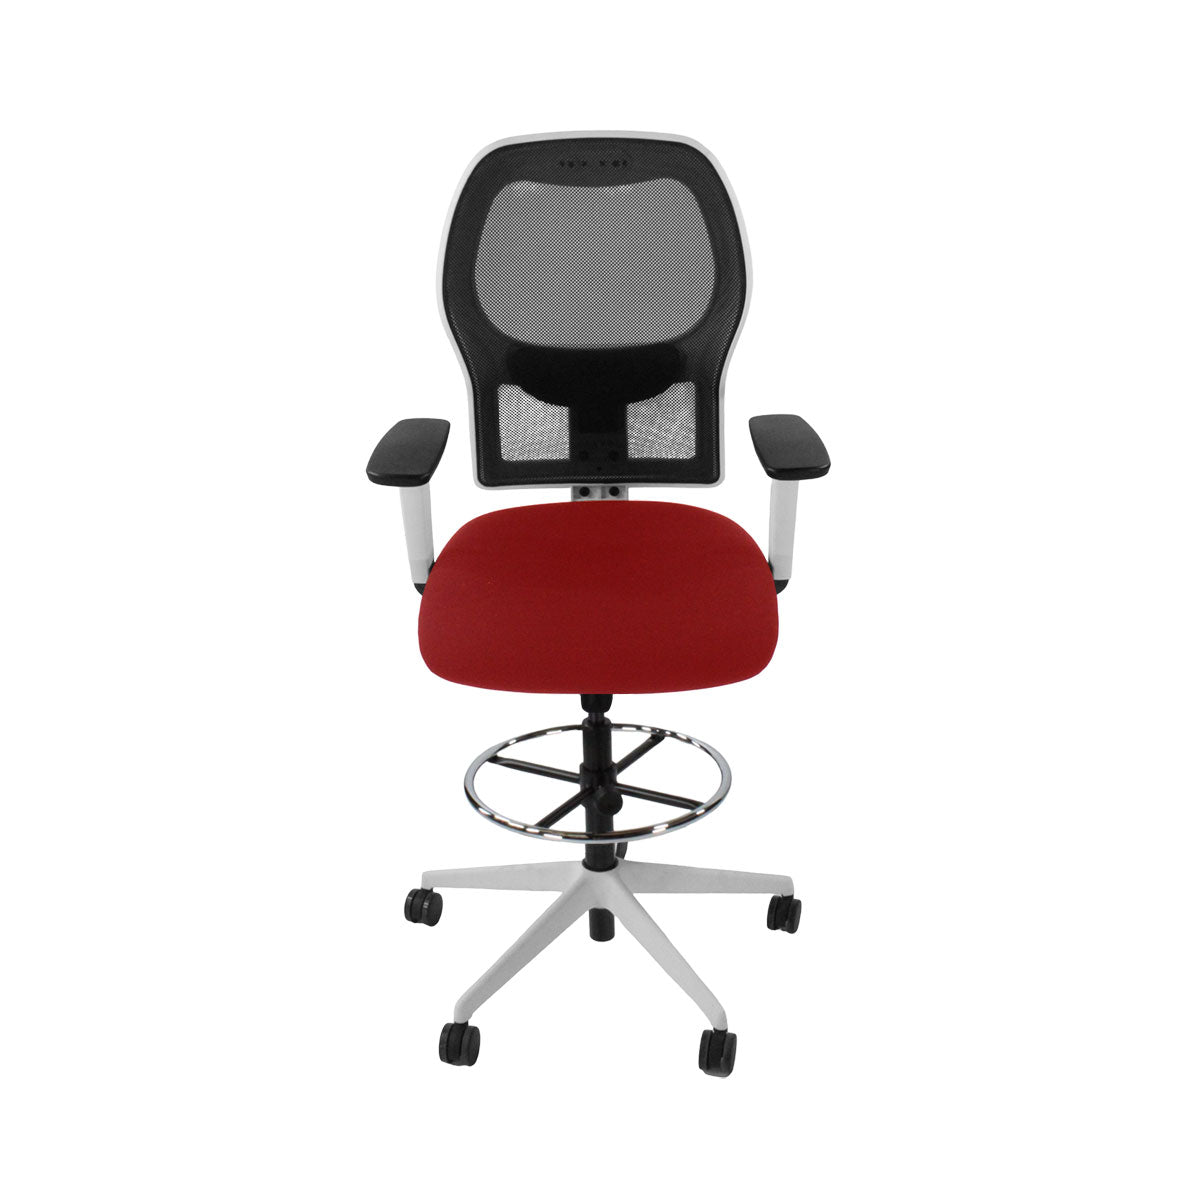 Ahrend: 160 Type Draughtsman Chair in Red Fabric - White Base - Refurbished